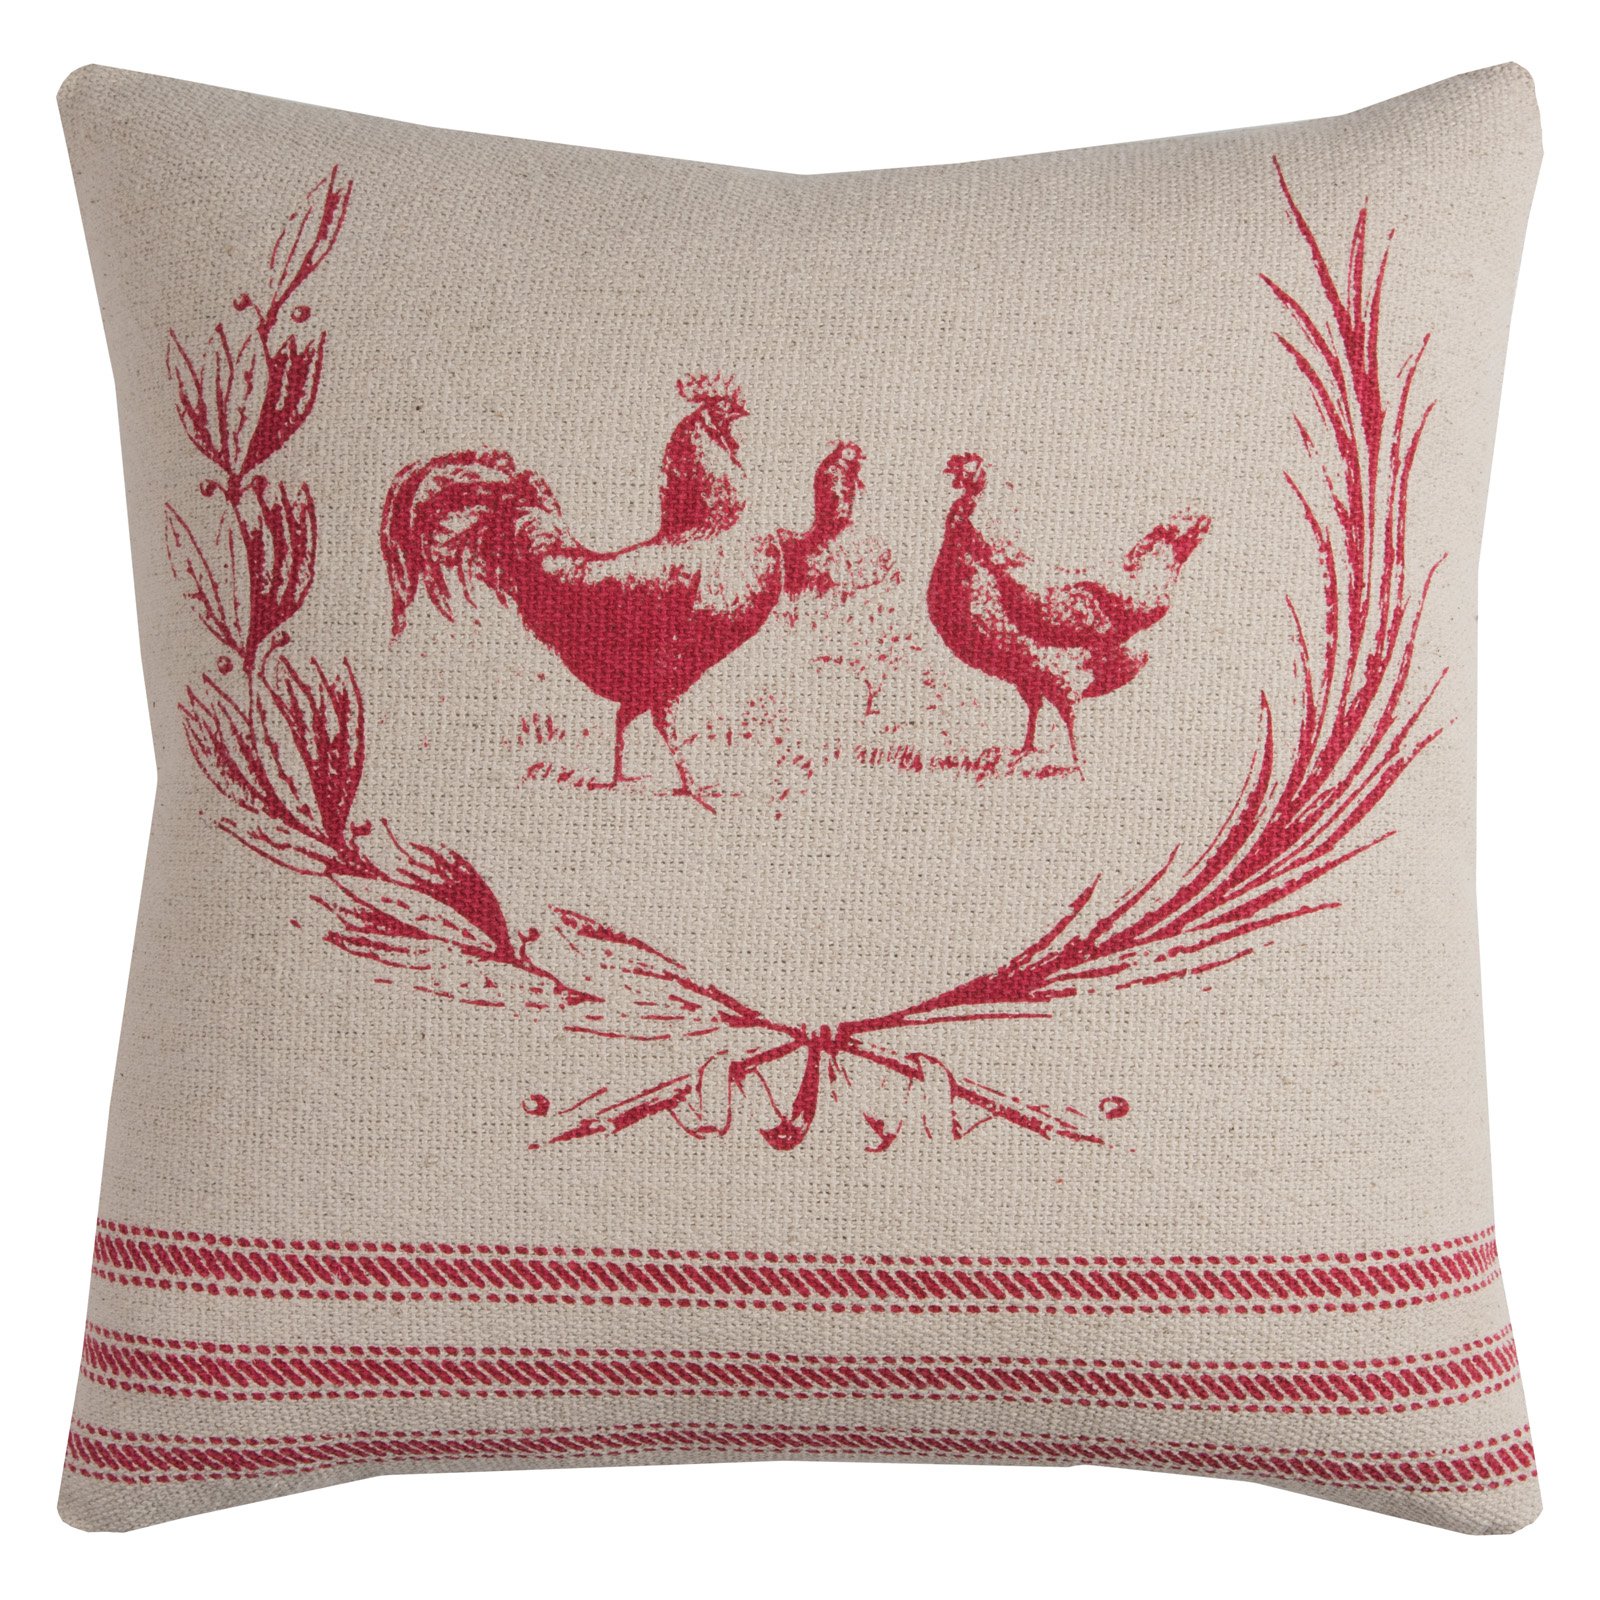 Rizzy Home Farmhouse Rooster Cotton With Zipper Closer Decorative Throw Pillow, 20" x 20", Red - image 1 of 2